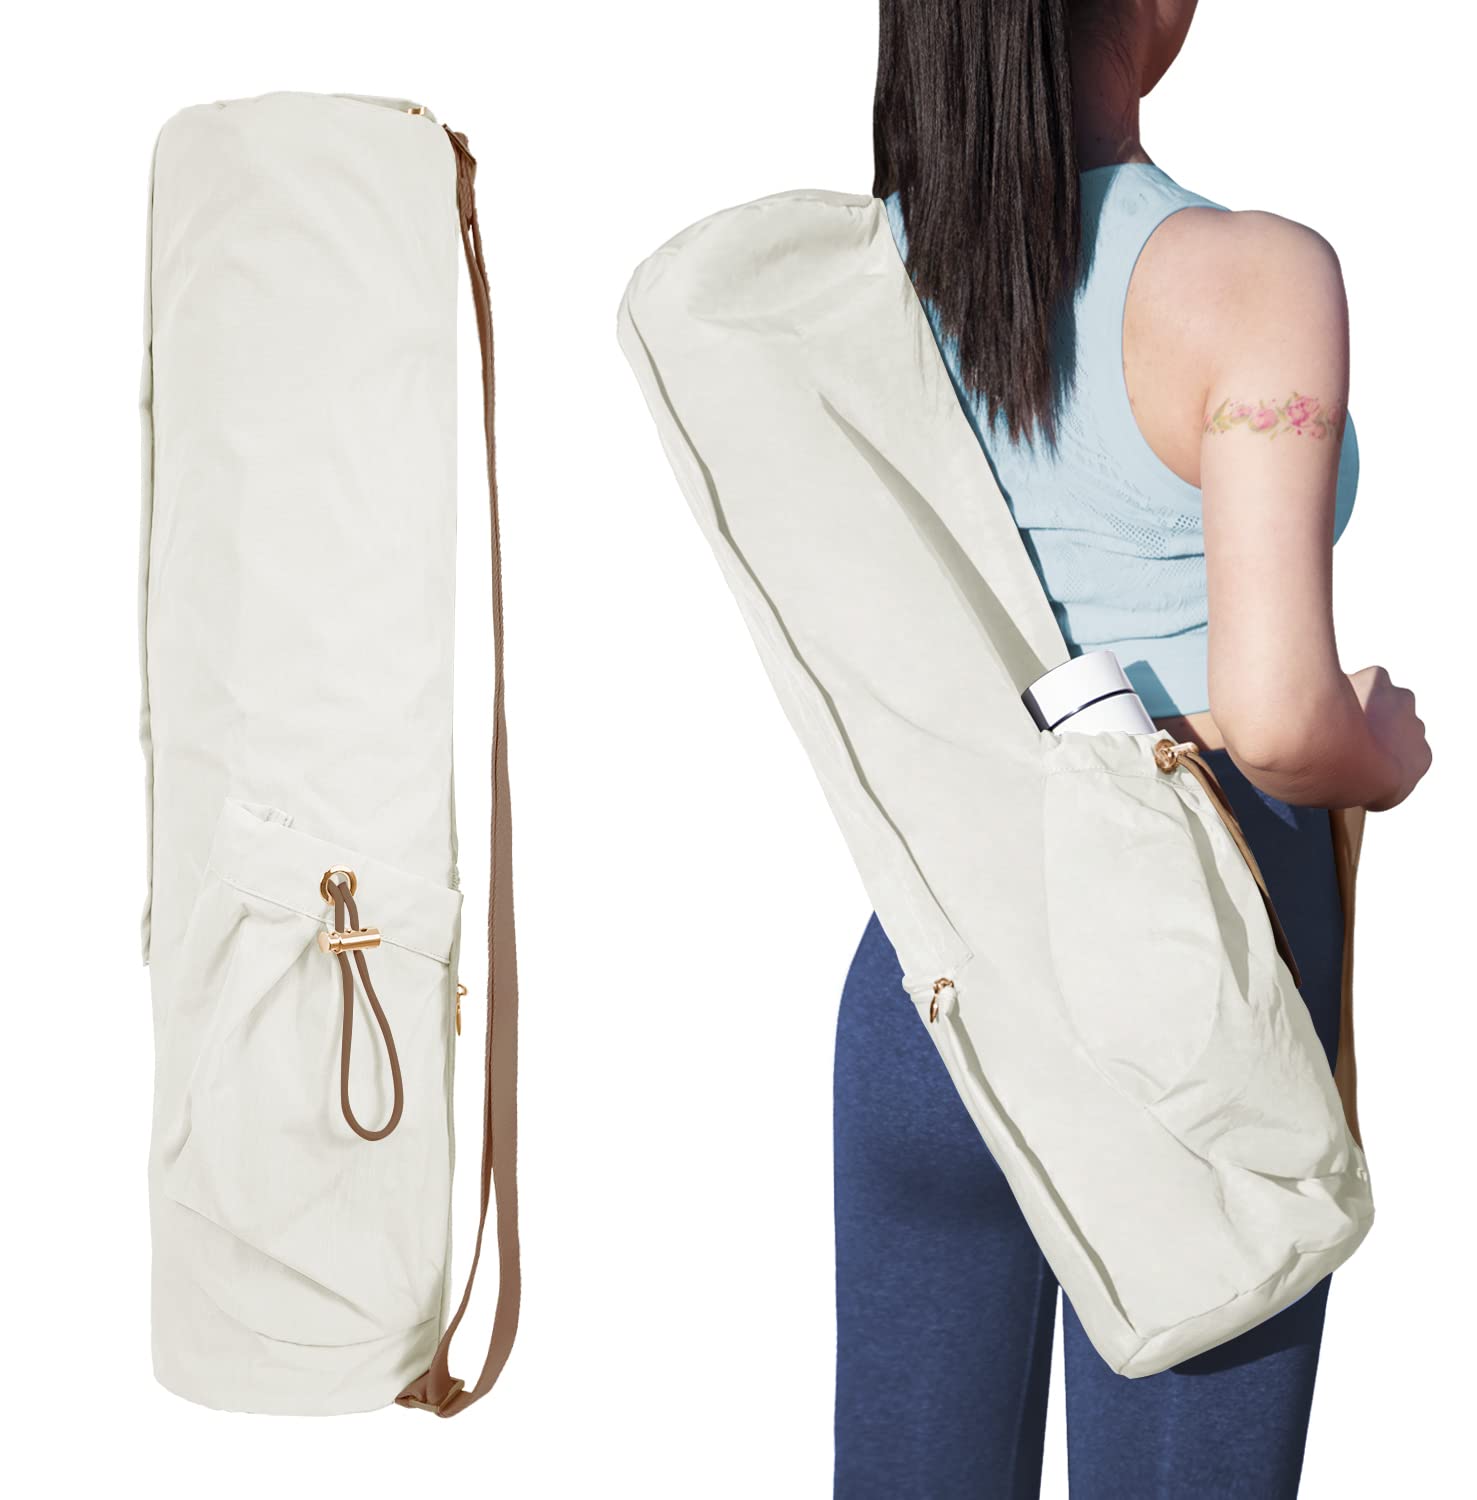 Yoga Mat Bag | Fashion Yoga Bag Backpack with Zipper Pocket for Valuables |  Great gift for all yoga lovers!